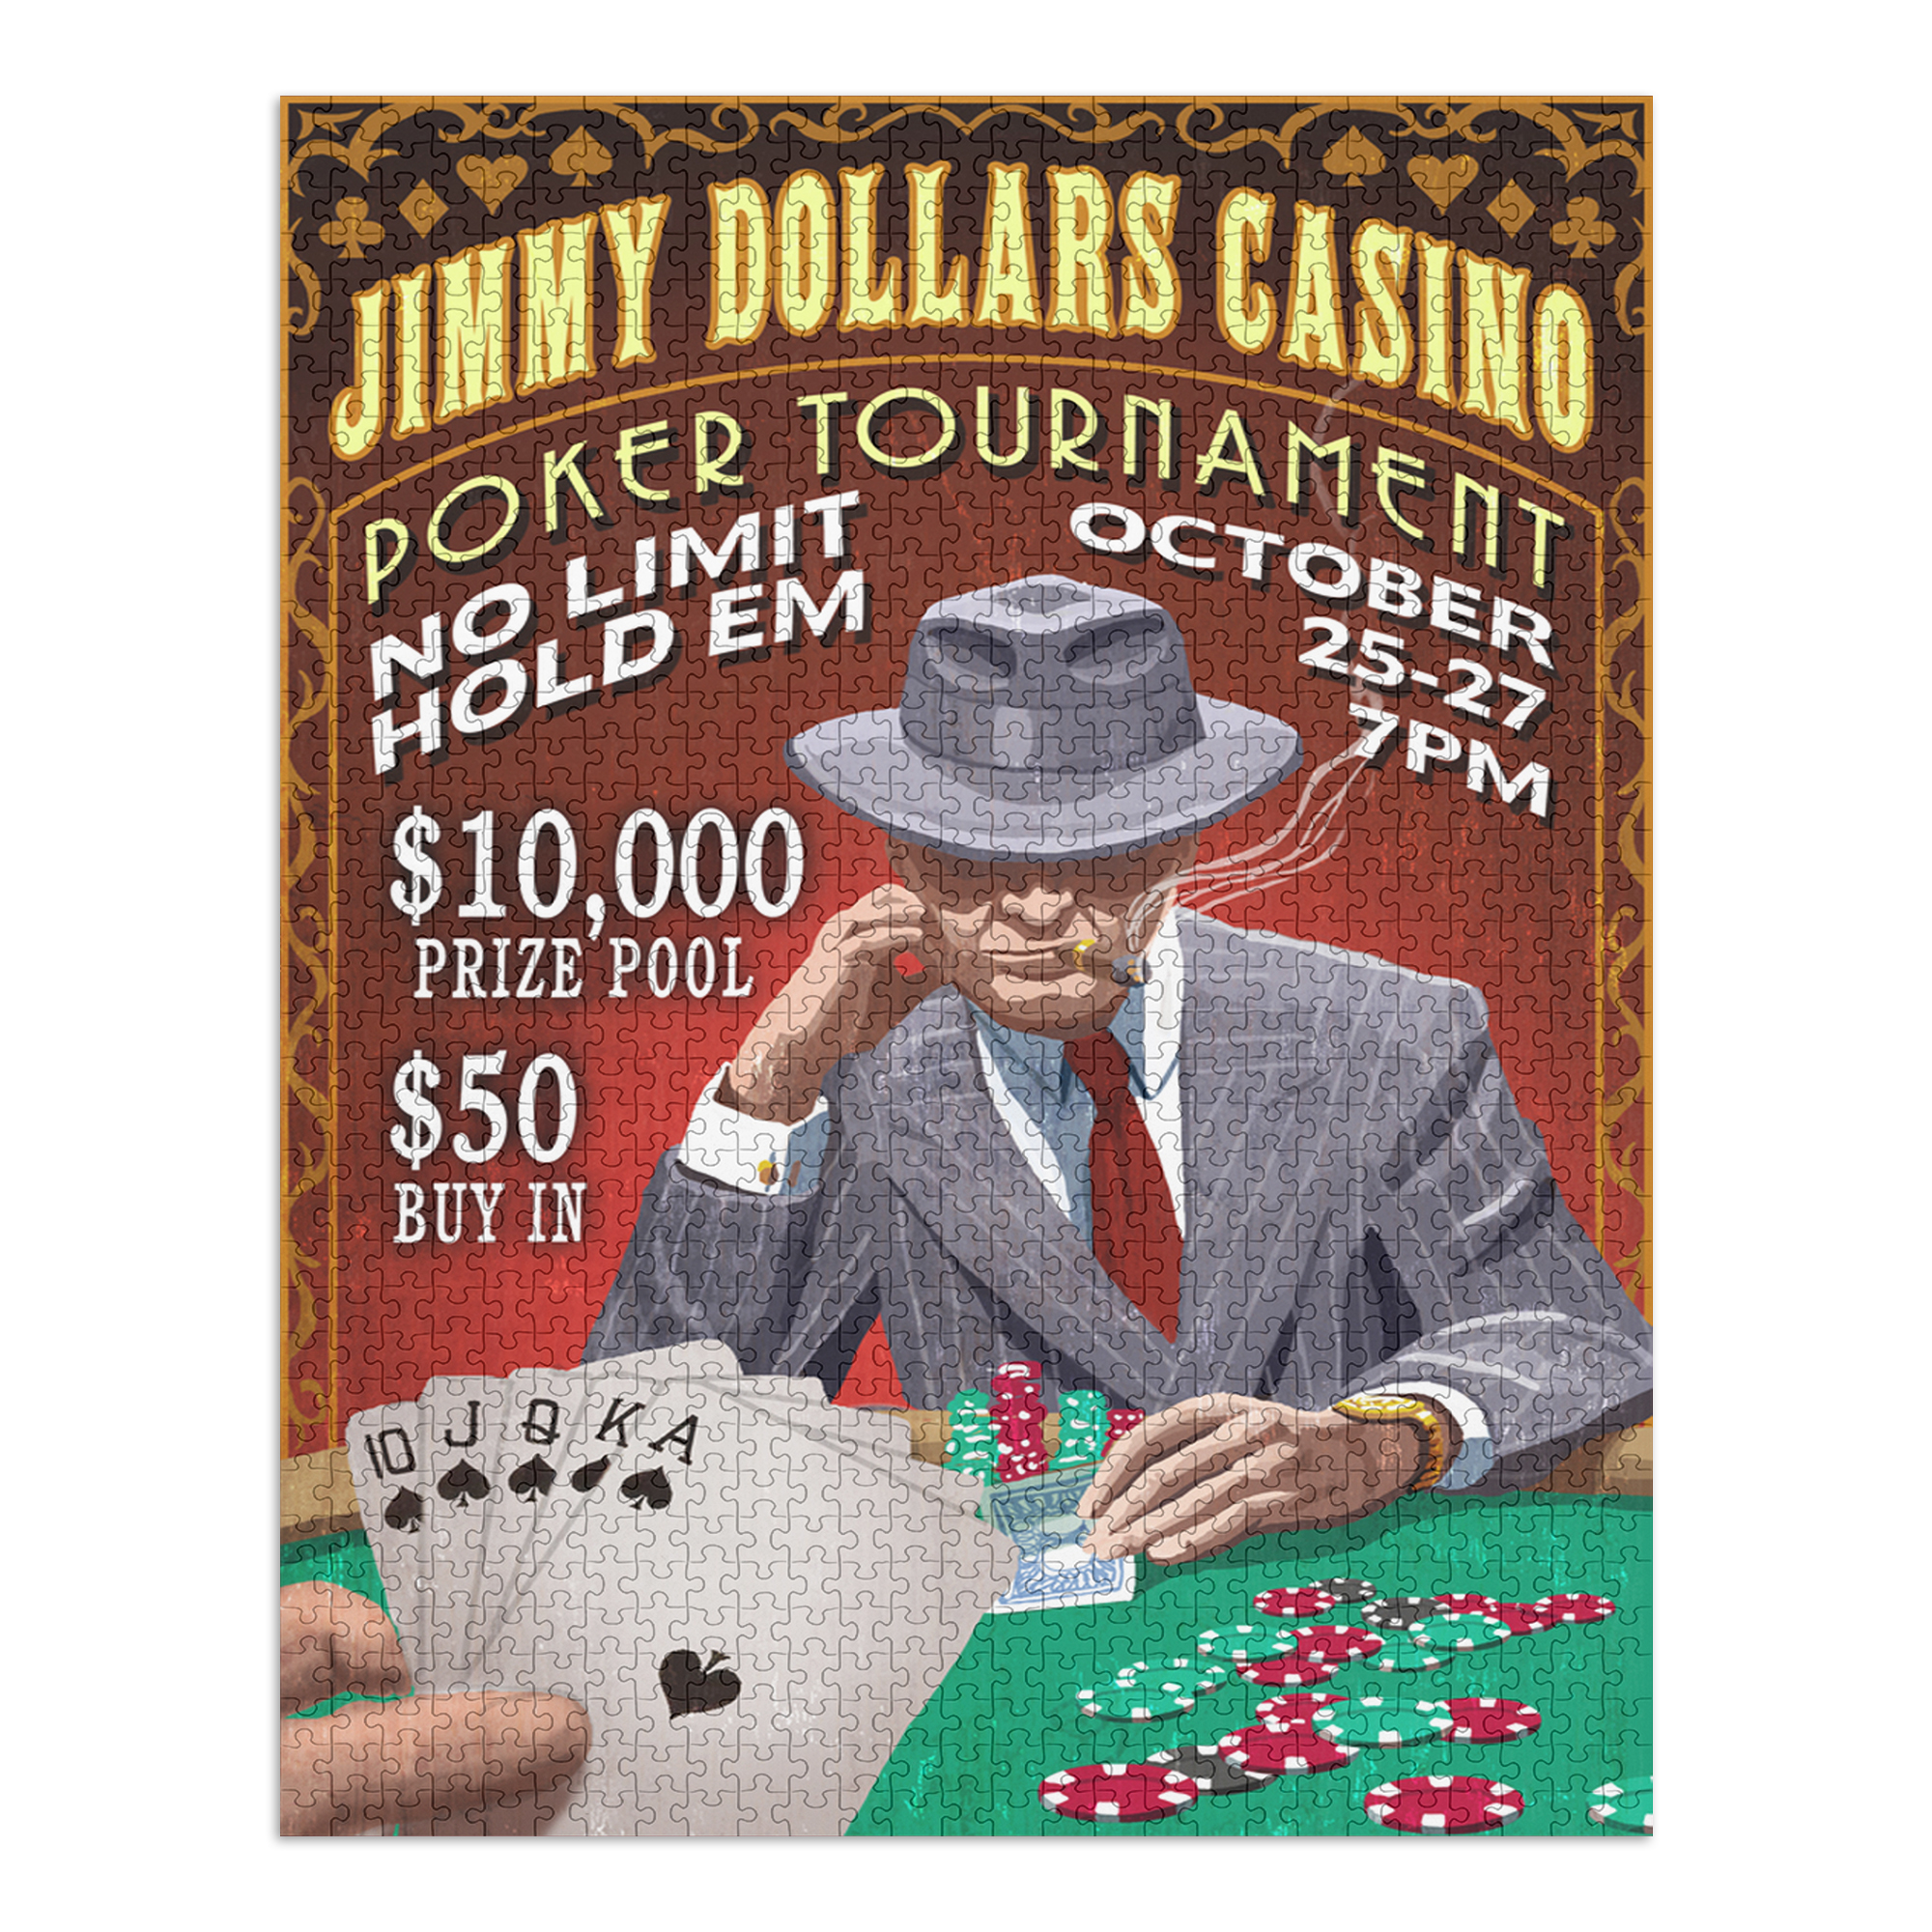 Poker Tournament, Vintage Sign (1000 Piece Puzzle, Size 19x27, Challenging Jigsaw Puzzle for Adults and Family, Made in USA) - image 2 of 4